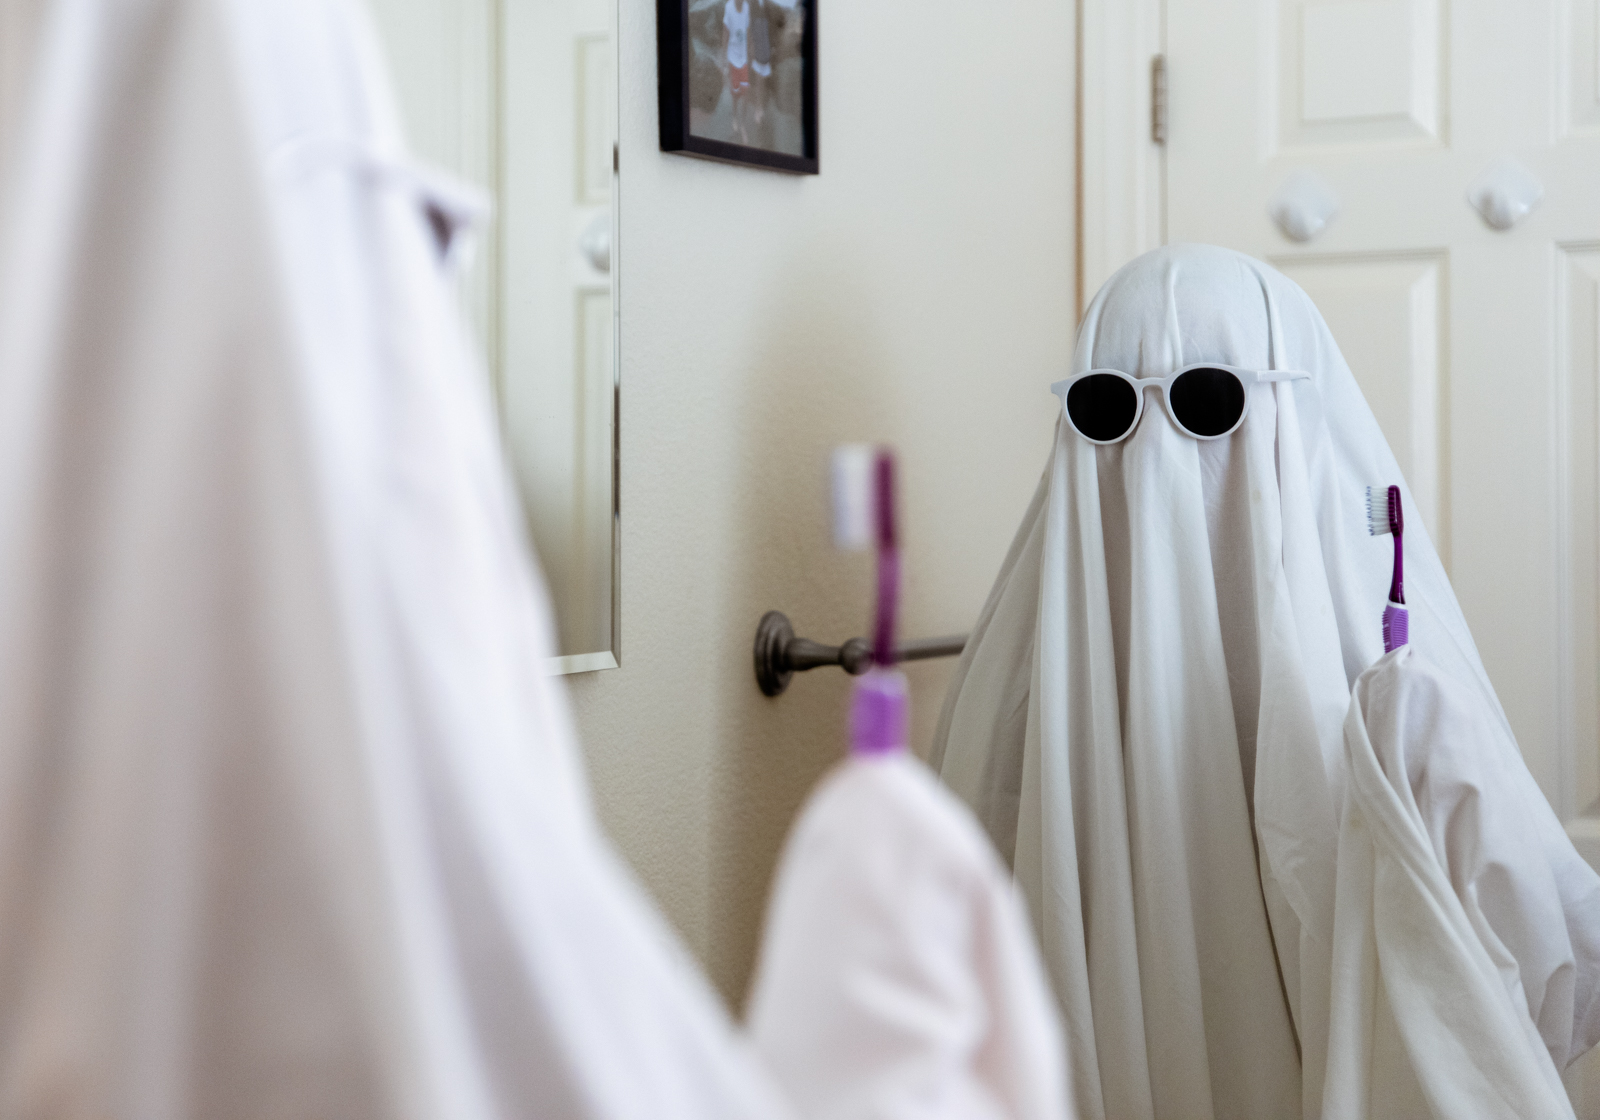 Gallery: Stories of sheet ghosts around the globe - Daily Bruin